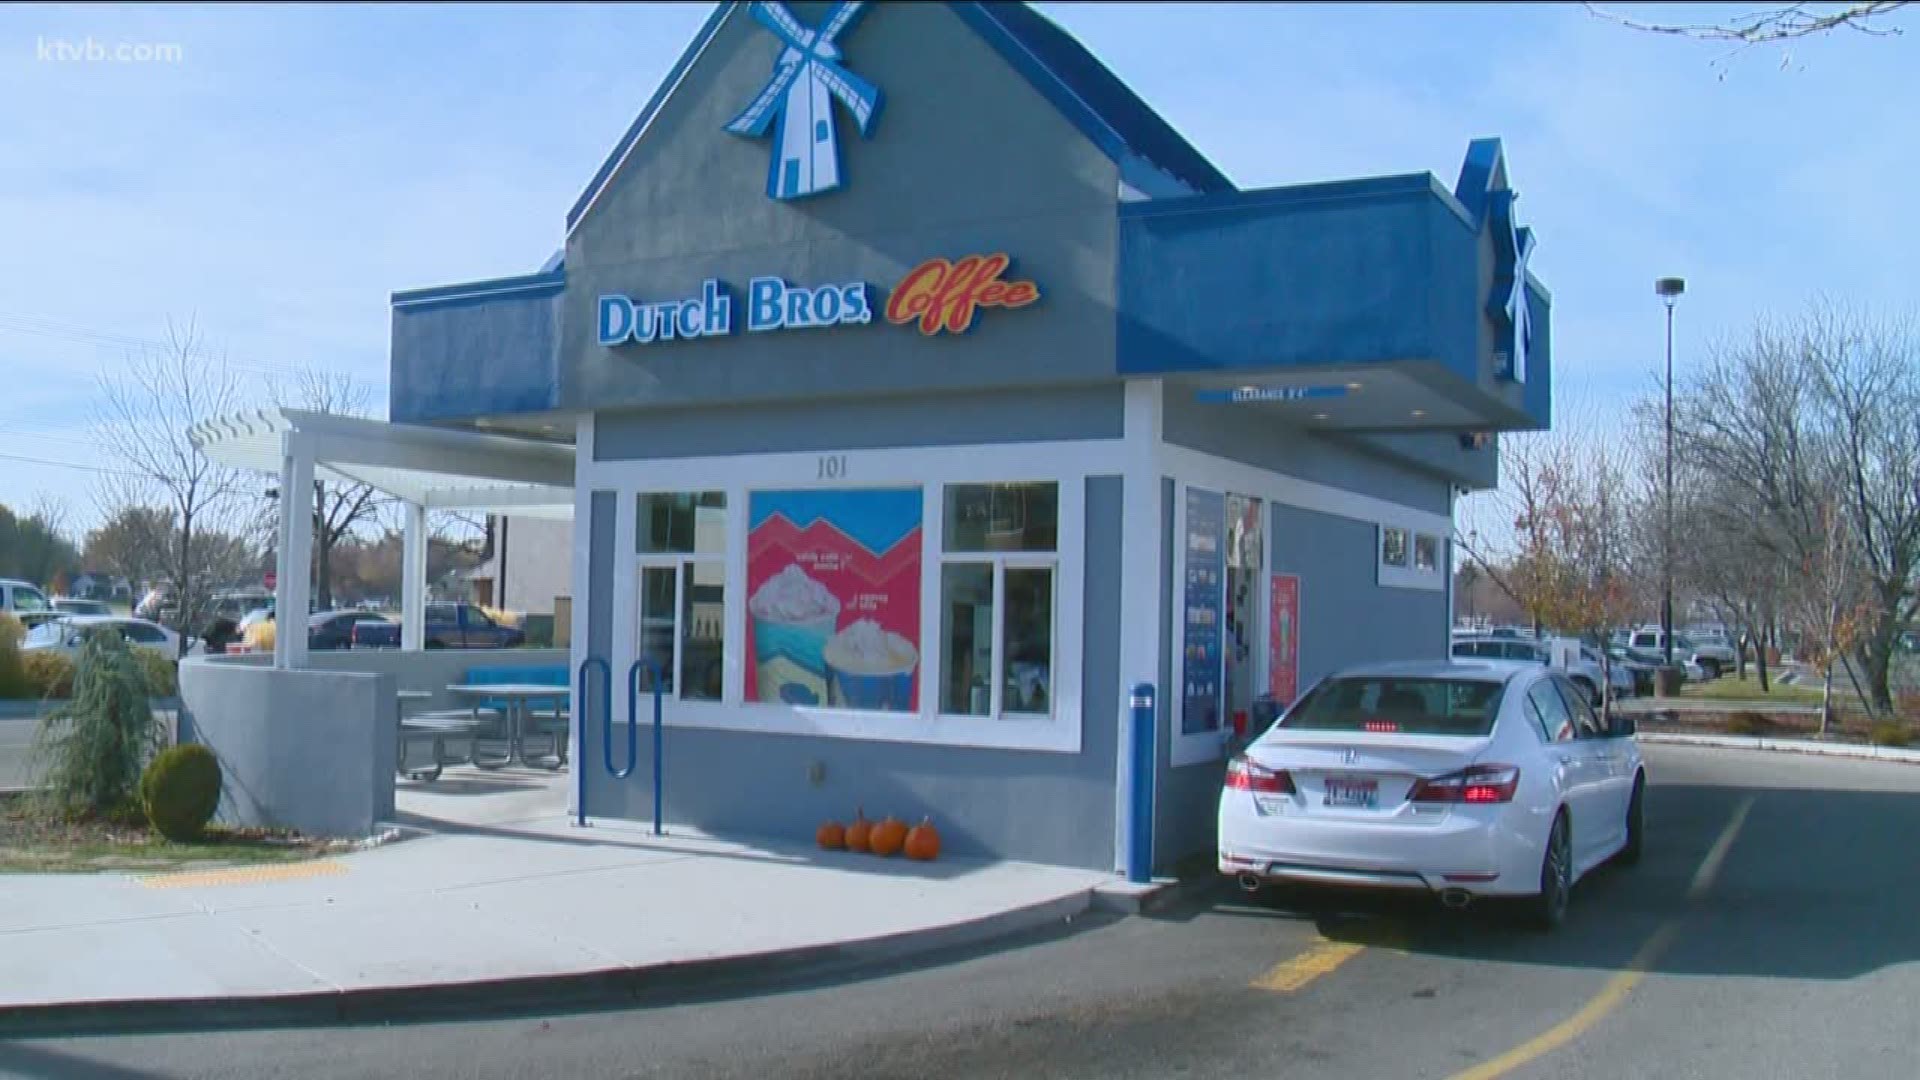 Dutch Bros plans to match donations up to $150,000 to help with wildfire relief.